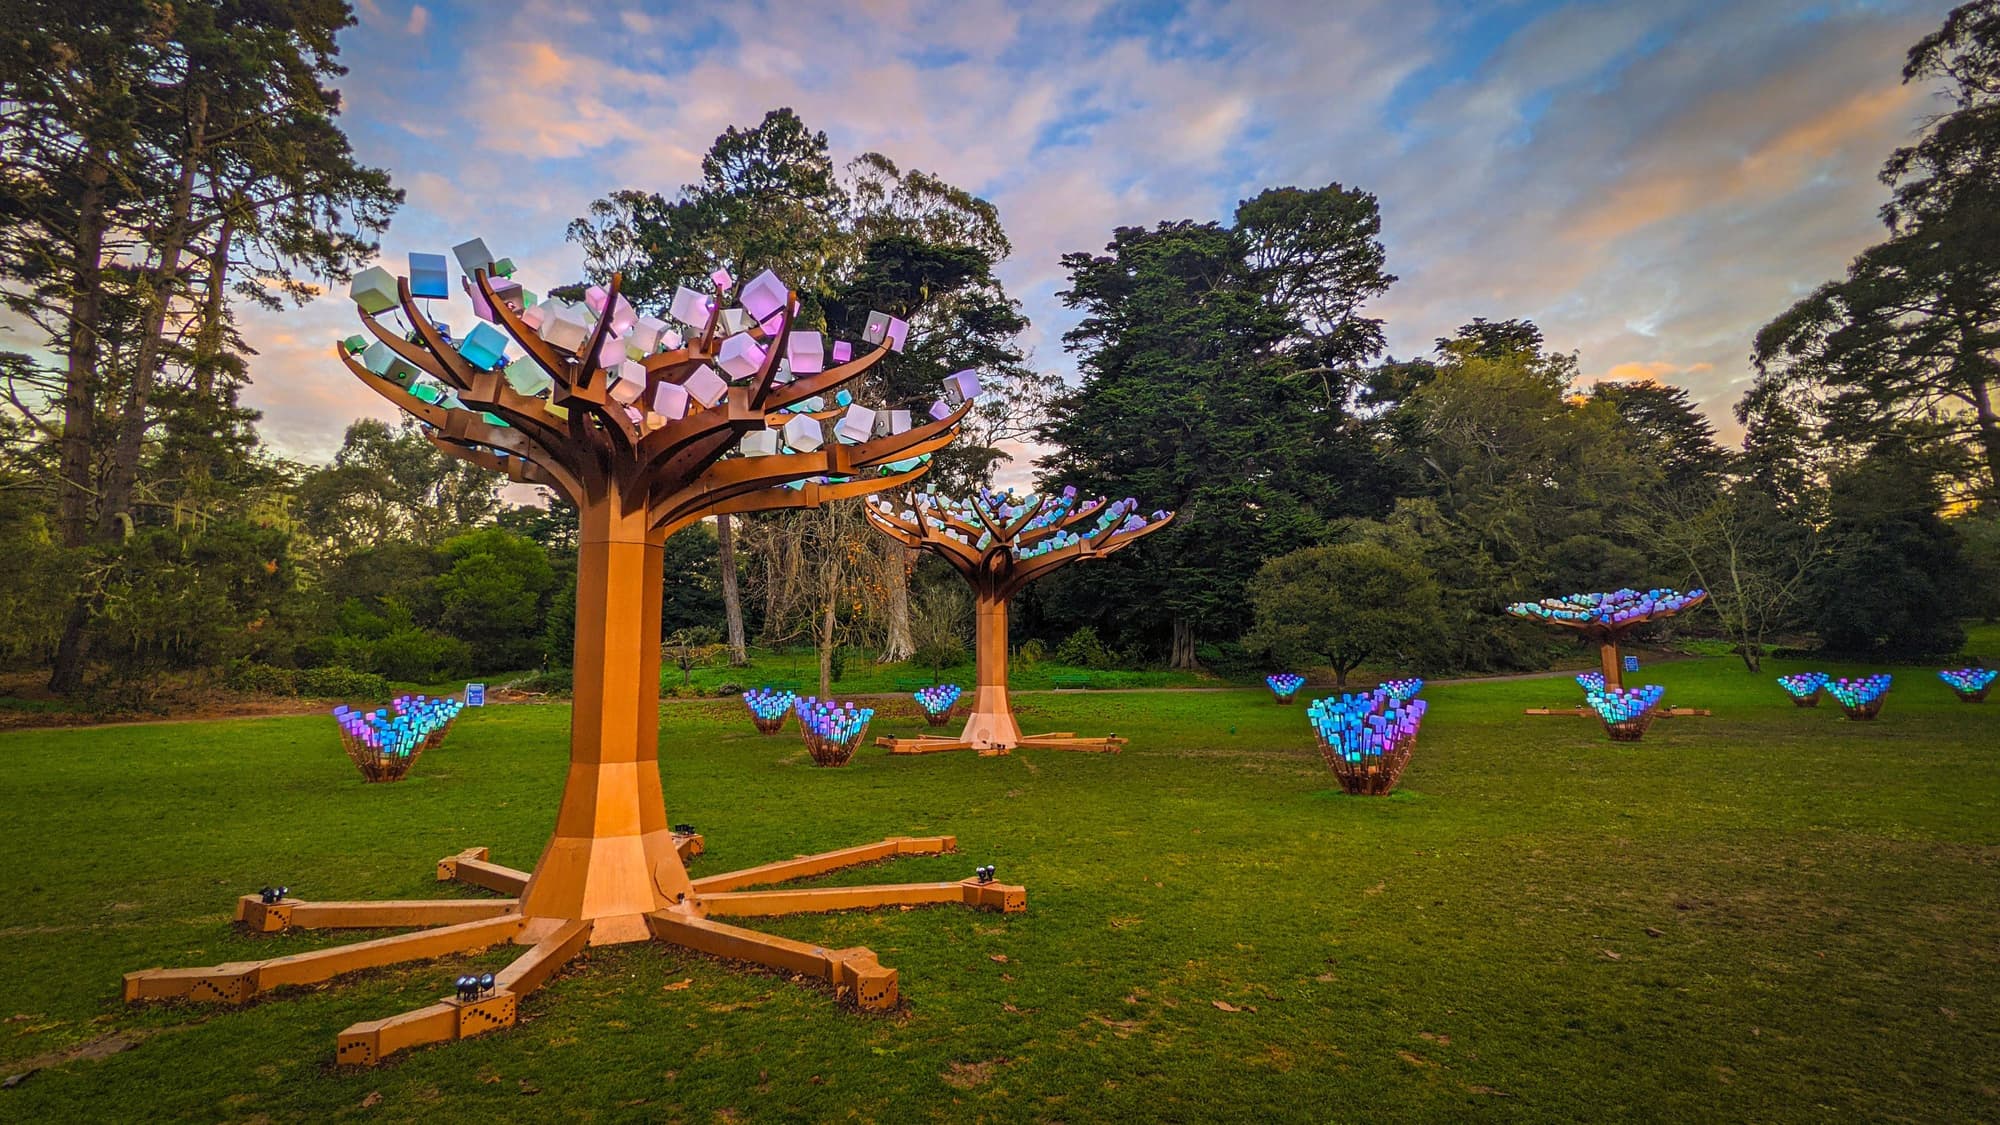 Entwined Fantastical LED Tree Exhibit Brings Glow to Golden Gate Park